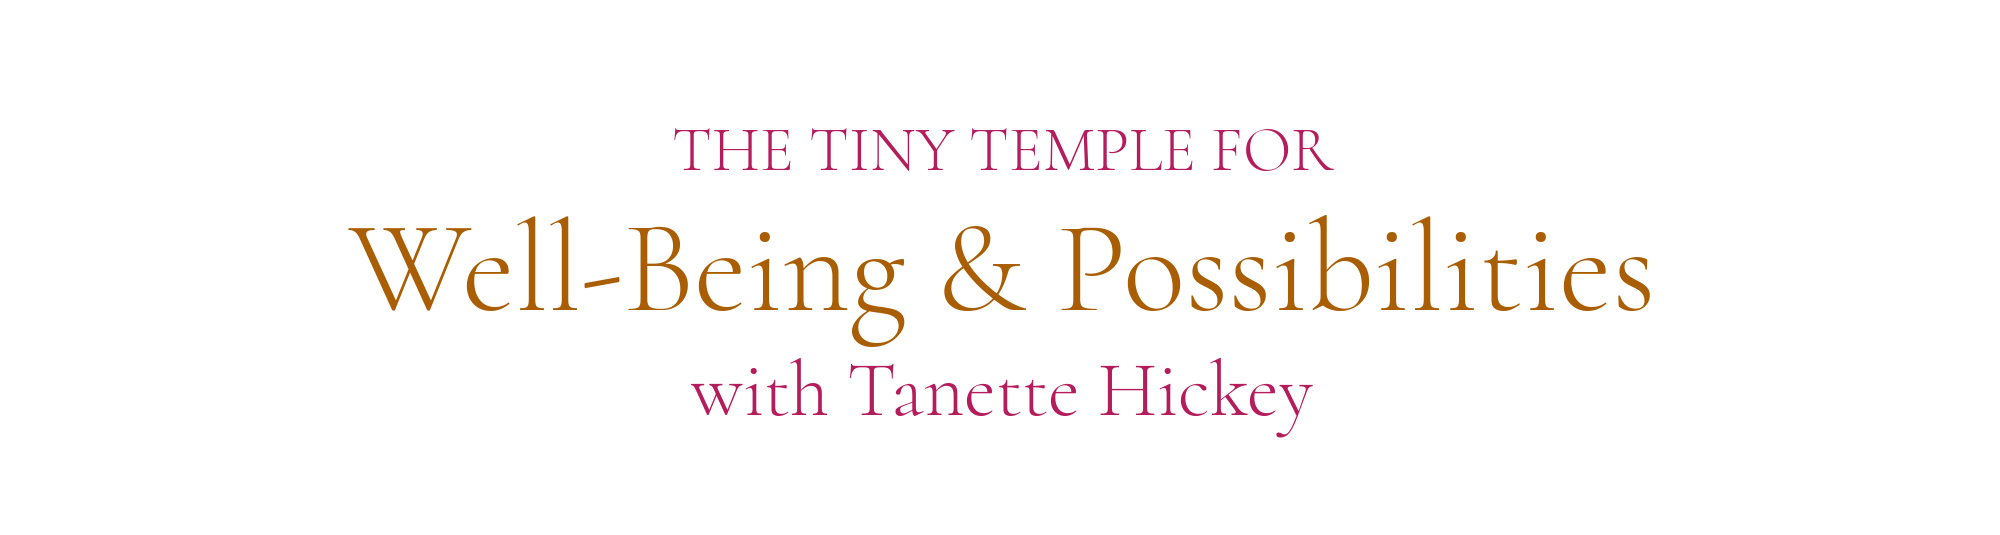 The Tiny Temple For Wellbeing & Possibilities